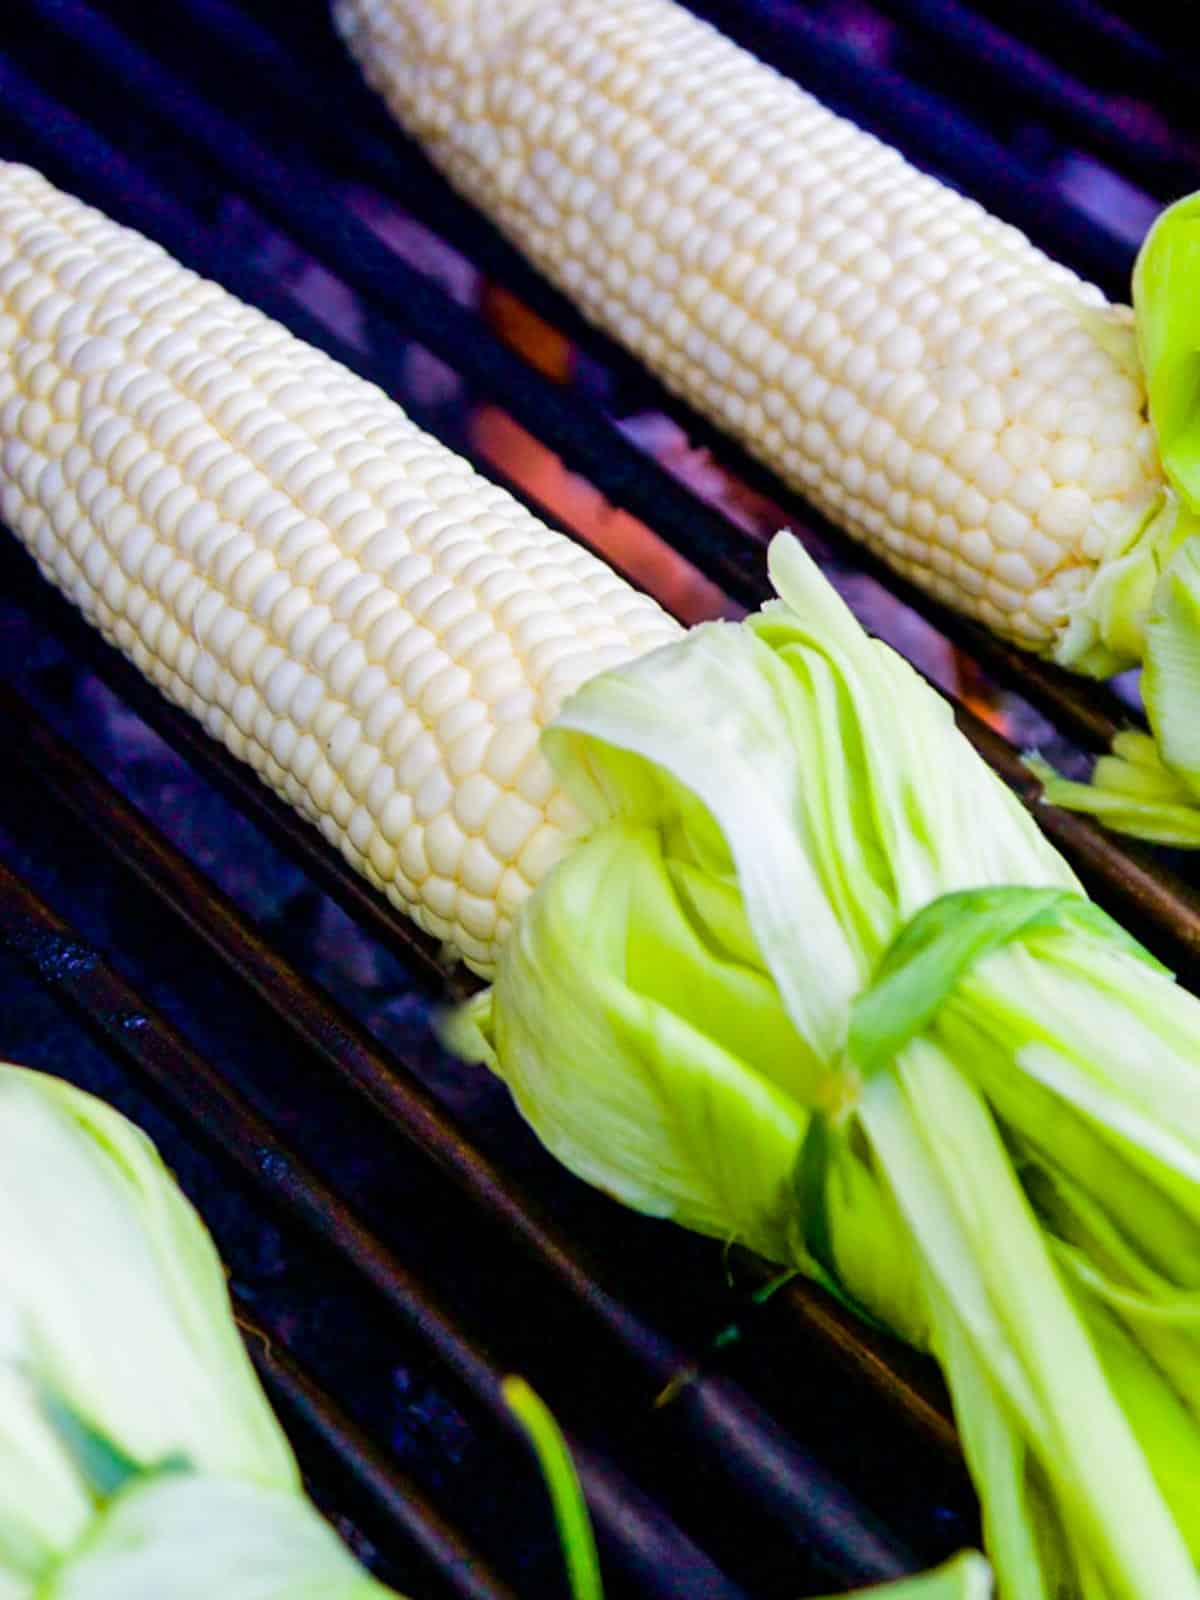 Ears of corn with the husk tied back on a grill.